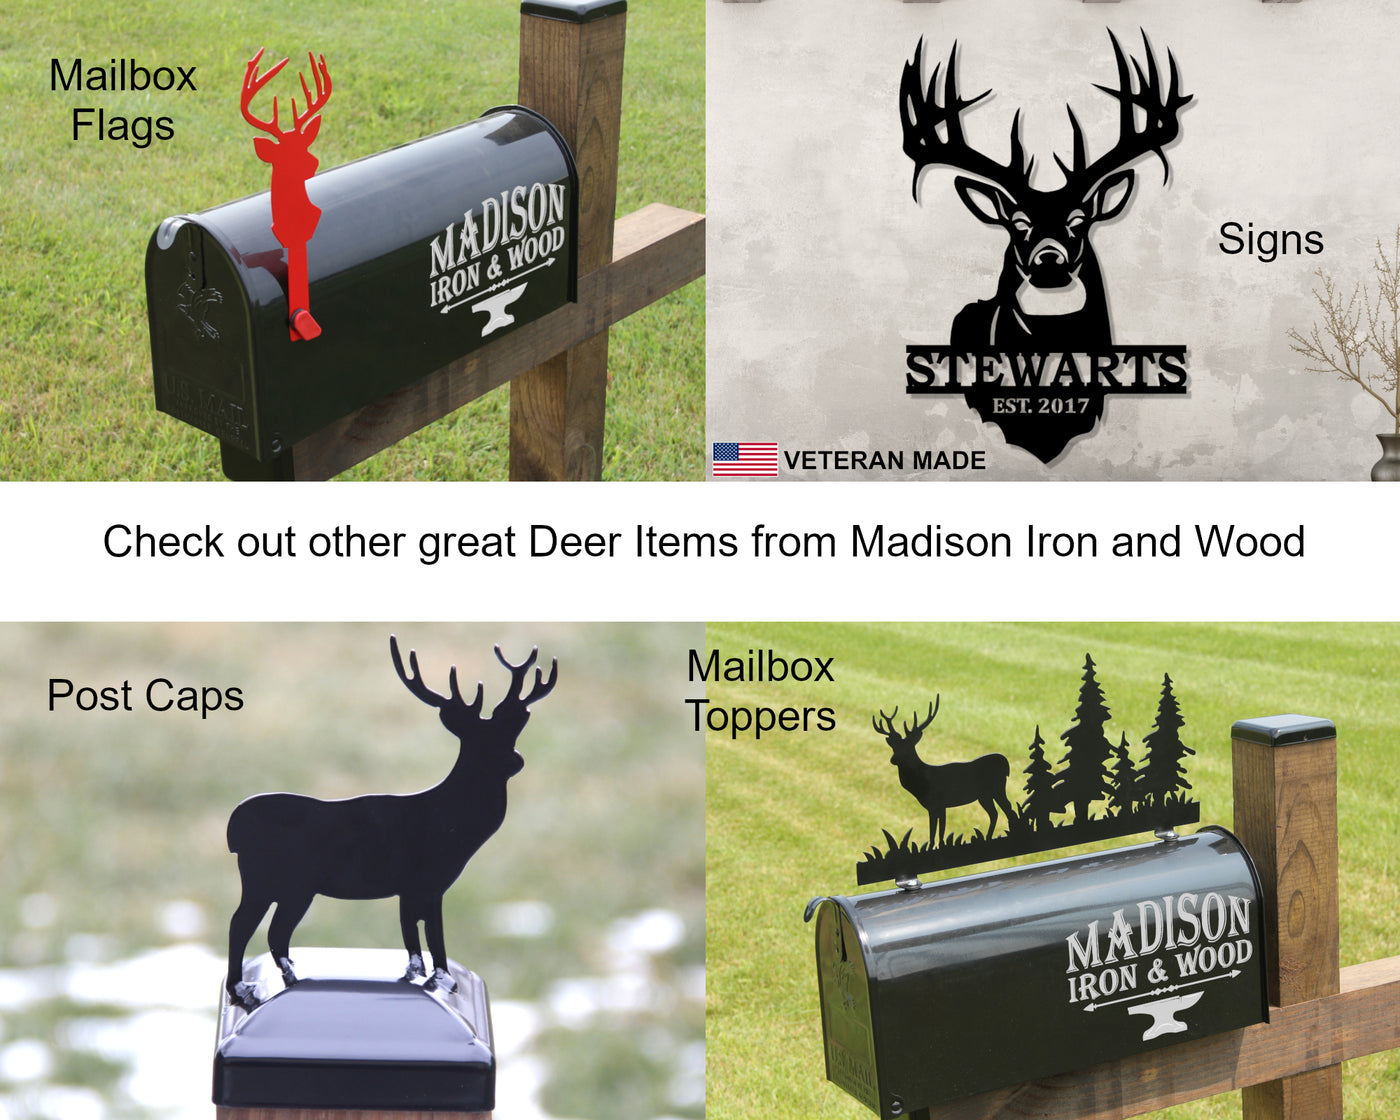 Personalized Deer in Woods Metal Sign - Madison Iron and Wood - Personalized sign - metal outdoor decor - Steel deocrations - american made products - veteran owned business products - fencing decorations - fencing supplies - custom wall decorations - personalized wall signs - steel - decorative post caps - steel post caps - metal post caps - brackets - structural brackets - home improvement - easter - easter decorations - easter gift - easter yard decor